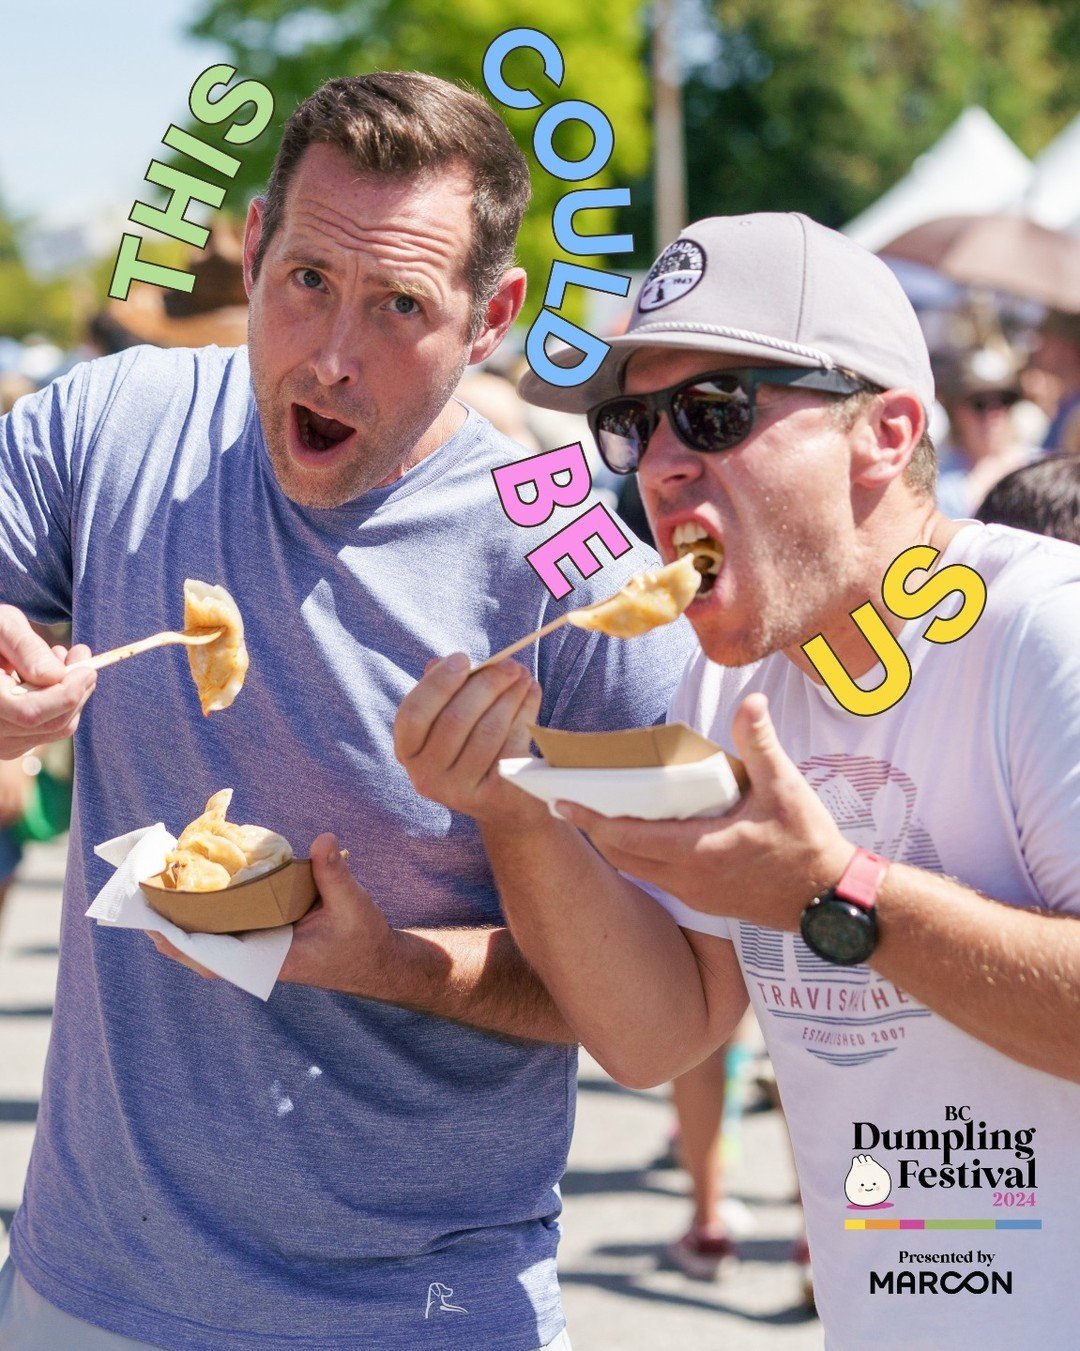 Tag your dumpling squad in the comments 👇

A beautiful summer day with dumplings, free entertainment, food trucks, and tons of activities? Say less.

Who are you bringing to Dumpling Fest 2024?🤔
.
.
.
.
.
[BC Dumpling Fest, Food Squad, Best Friends